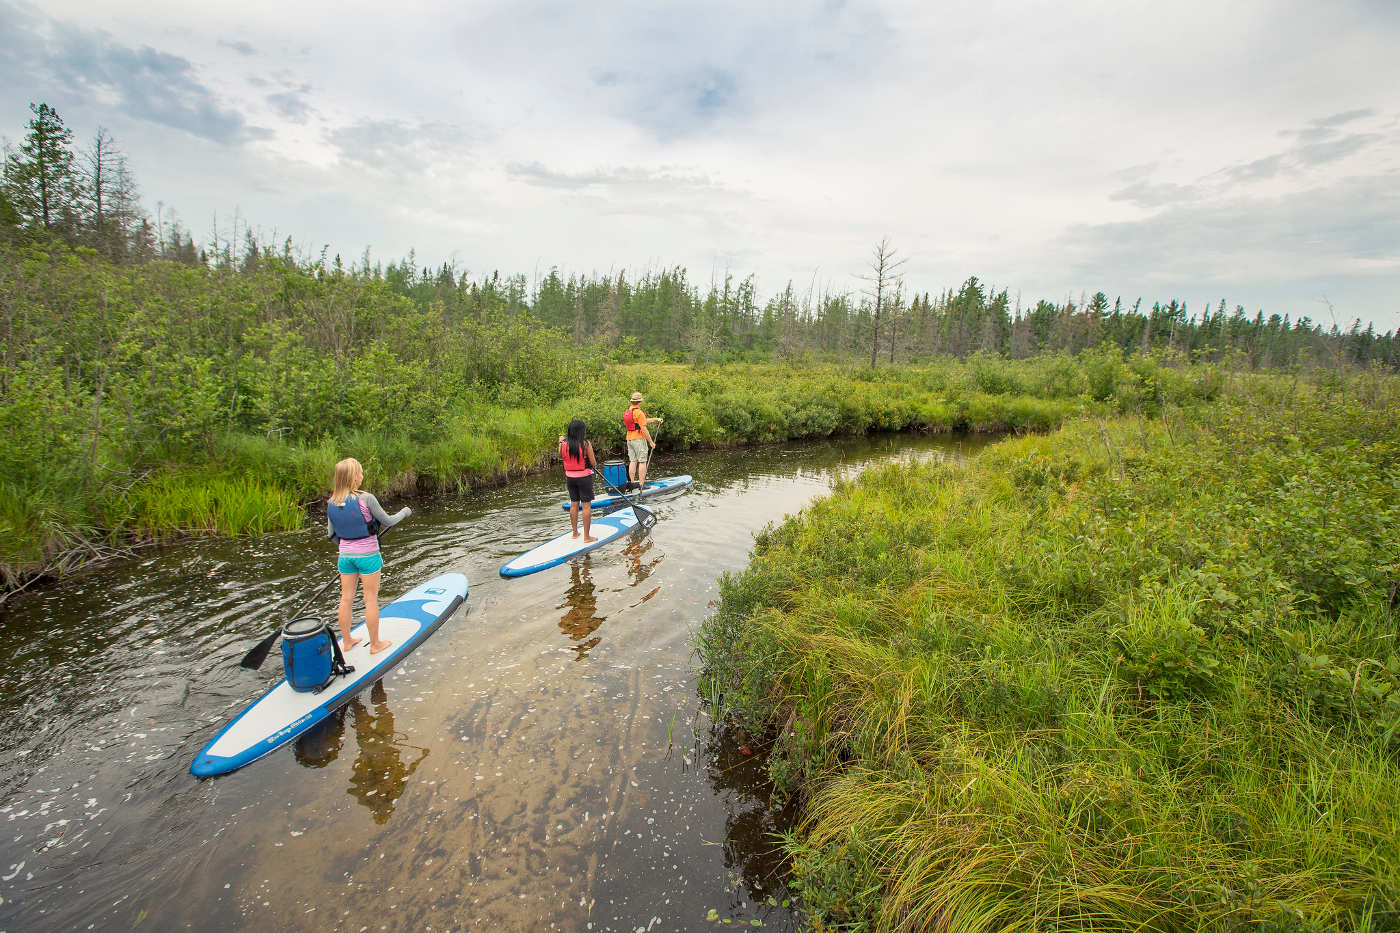 A standup paddle boarding nature outing in the summer